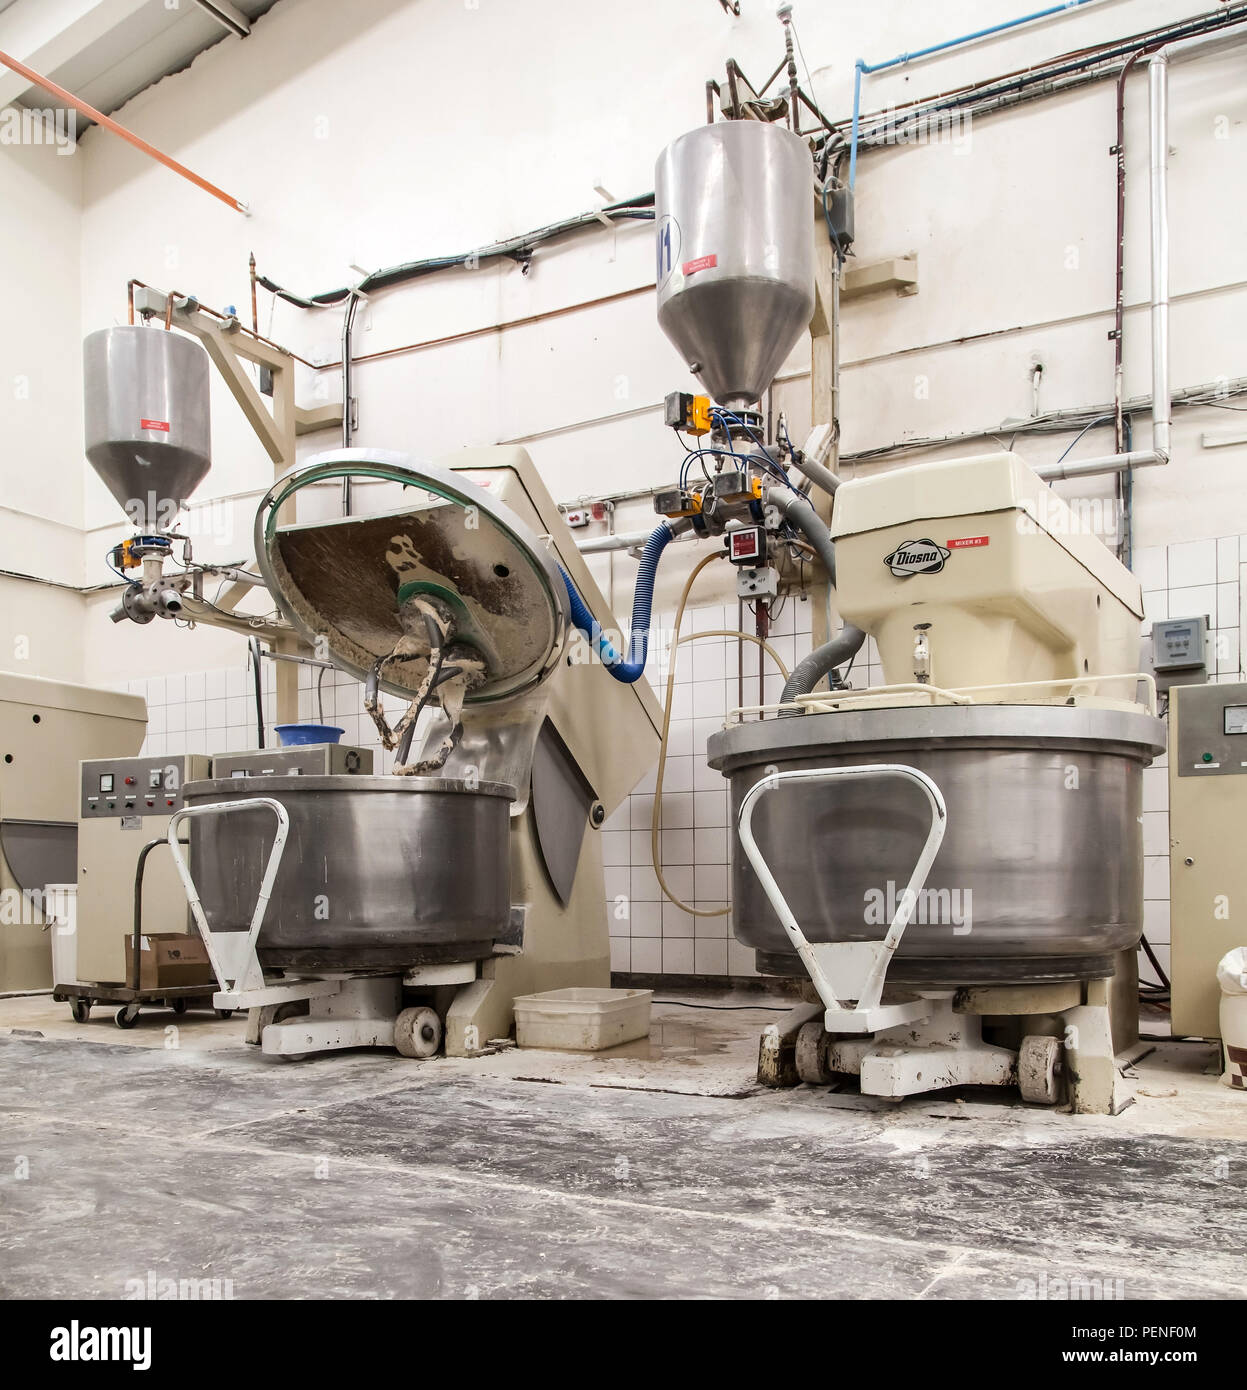 https://c8.alamy.com/comp/PENF0M/johannesburg-south-africa-9-march-2015-industrial-bread-dough-mixers-in-bakehouse-PENF0M.jpg